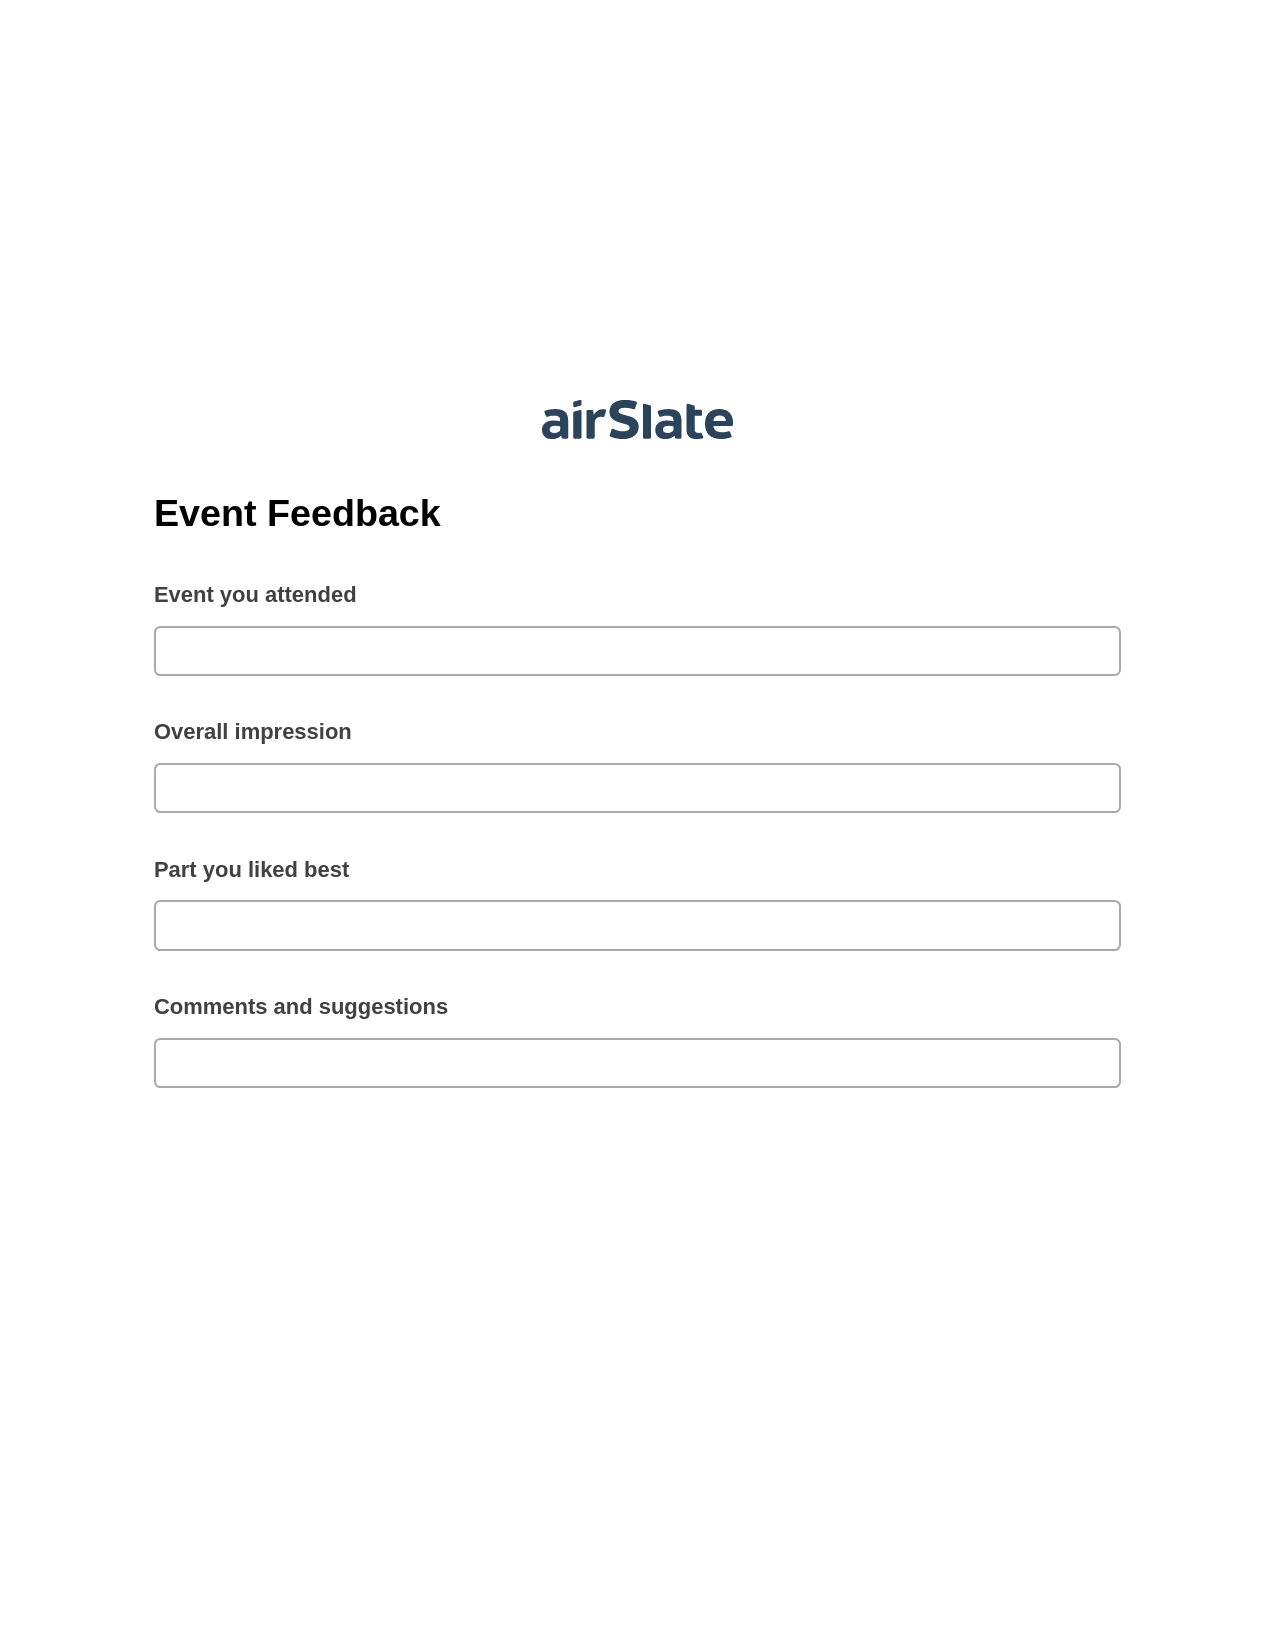 Event Feedback Pre-fill from Salesforce Records with SOQL Bot, Jira Bot, Export to Excel 365 Bot